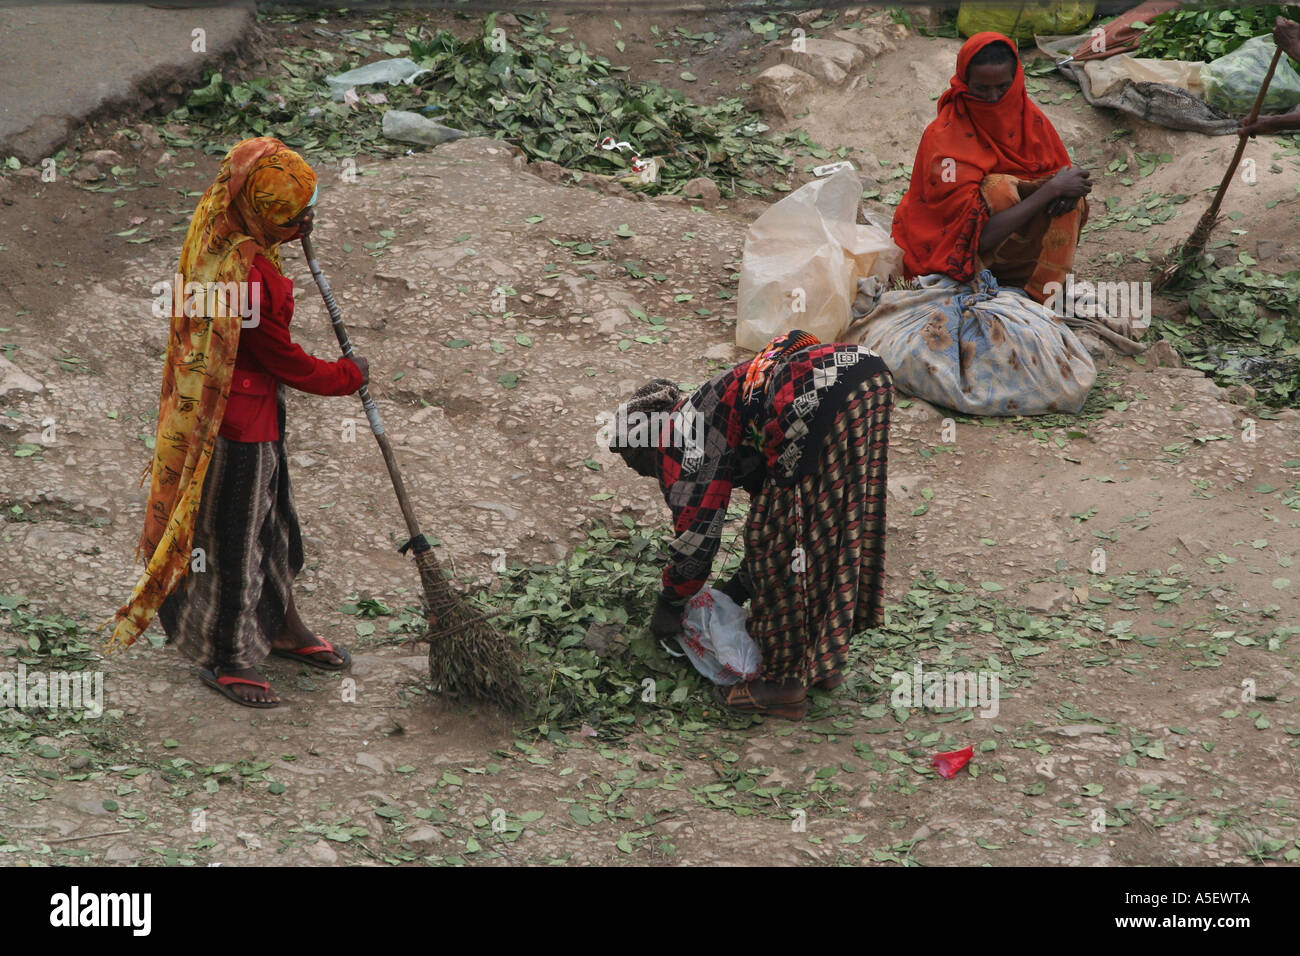 Harar, Ethiopia, women cleaning up dry leaves after selling bundles of Qat in the market Stock Photo